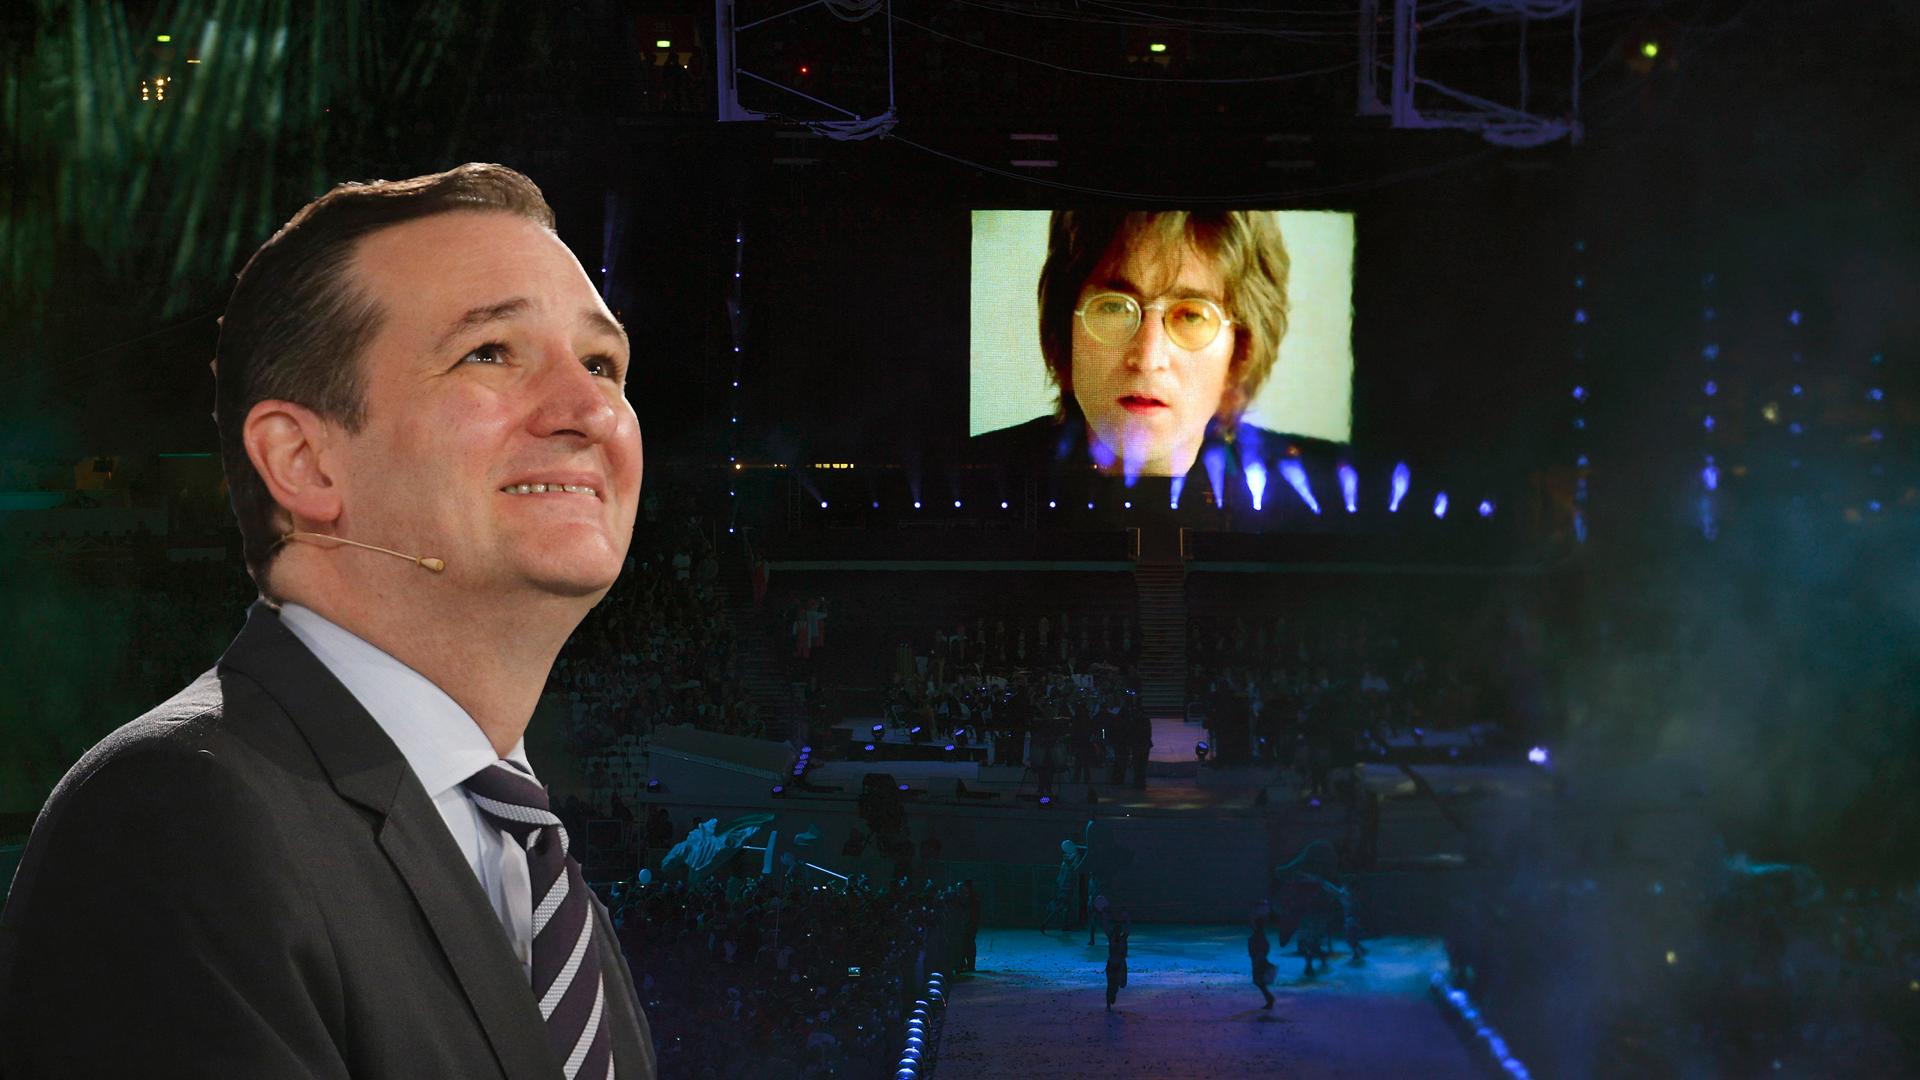 Photo illustration of Sen. Ted Cruz and a video of musician John Lennon singing his song "Imagine".